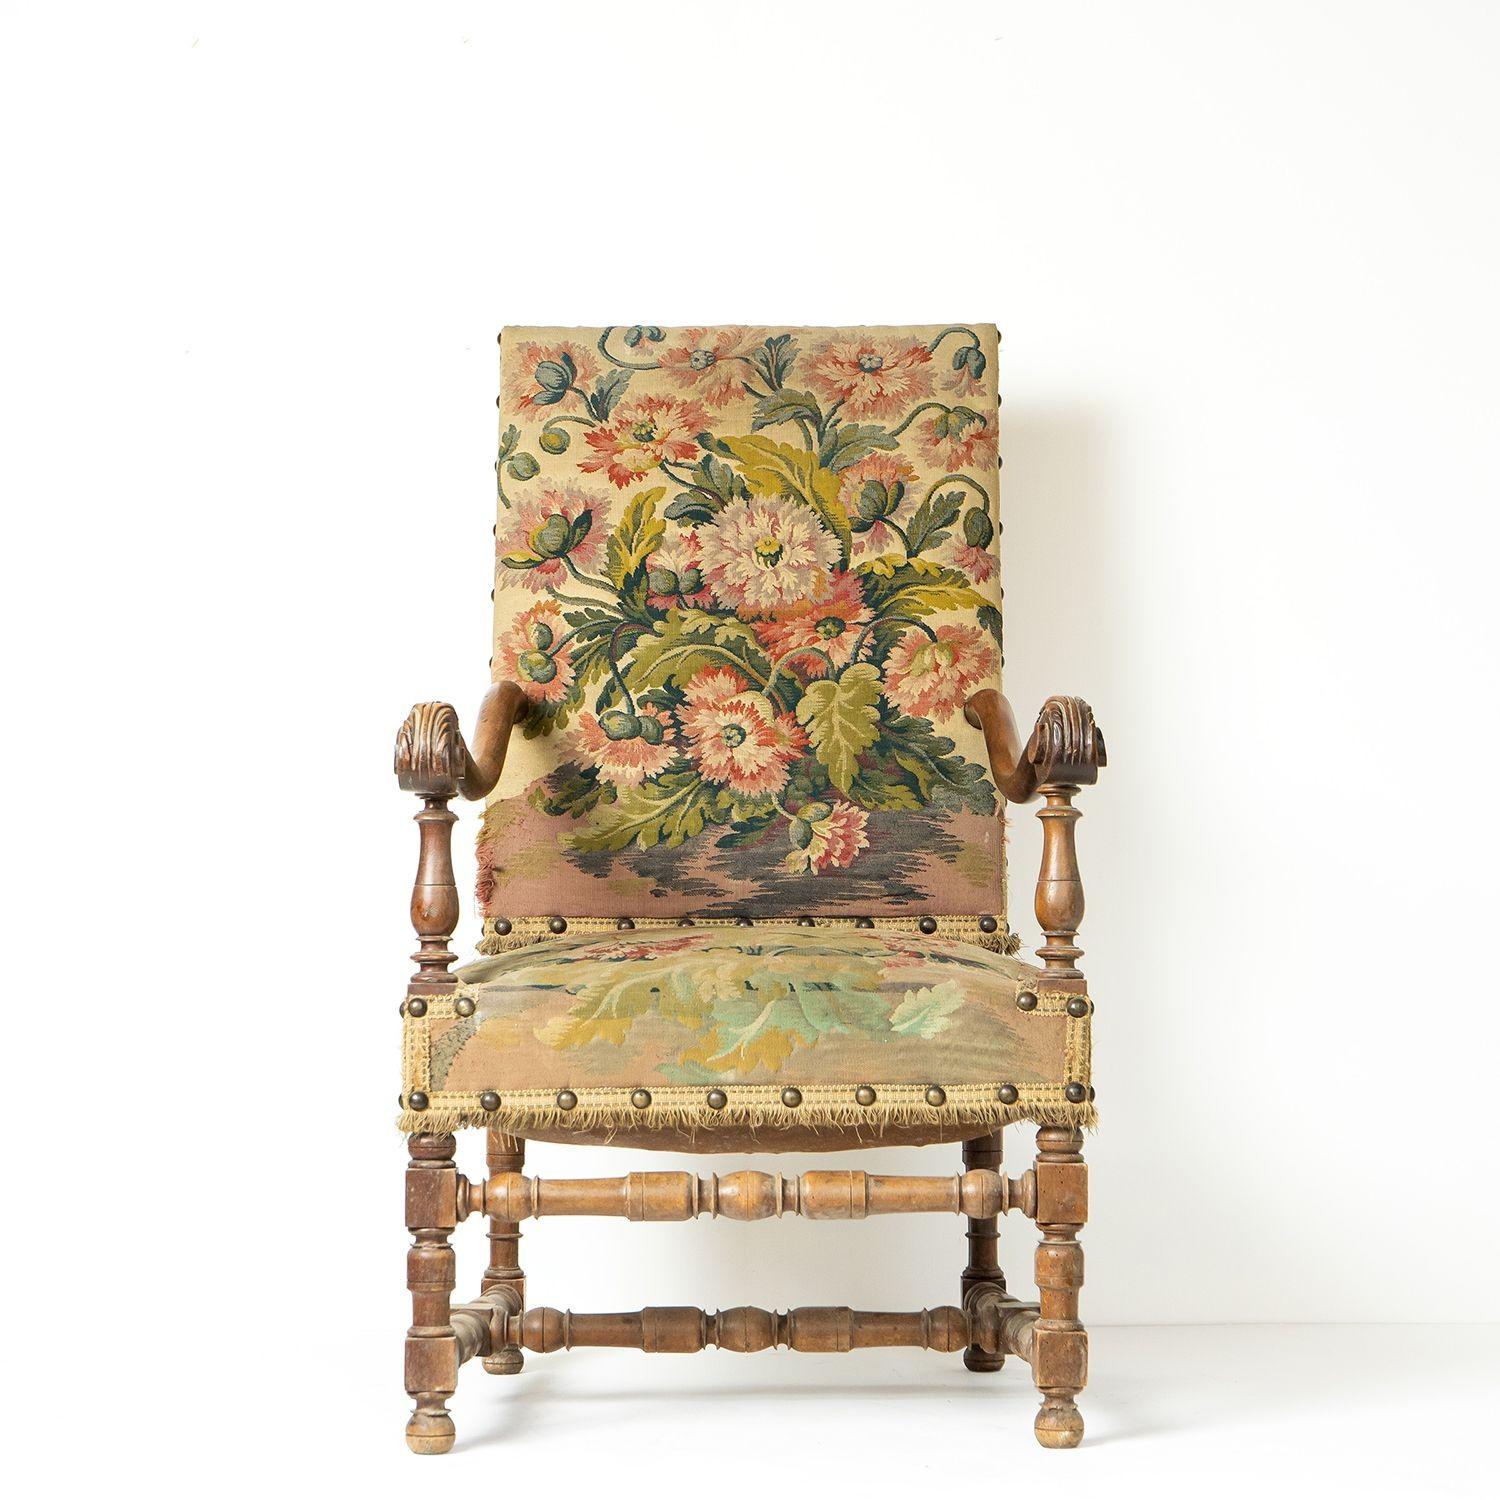 Large Antique Upholstered Fauteuil Open Armchair

A generous seat with its original floral tapestry upholstery depicting a spray of fancy poppies and poppy heads.

Carved walnut arms sweeping to great effect with turned walnut legs and